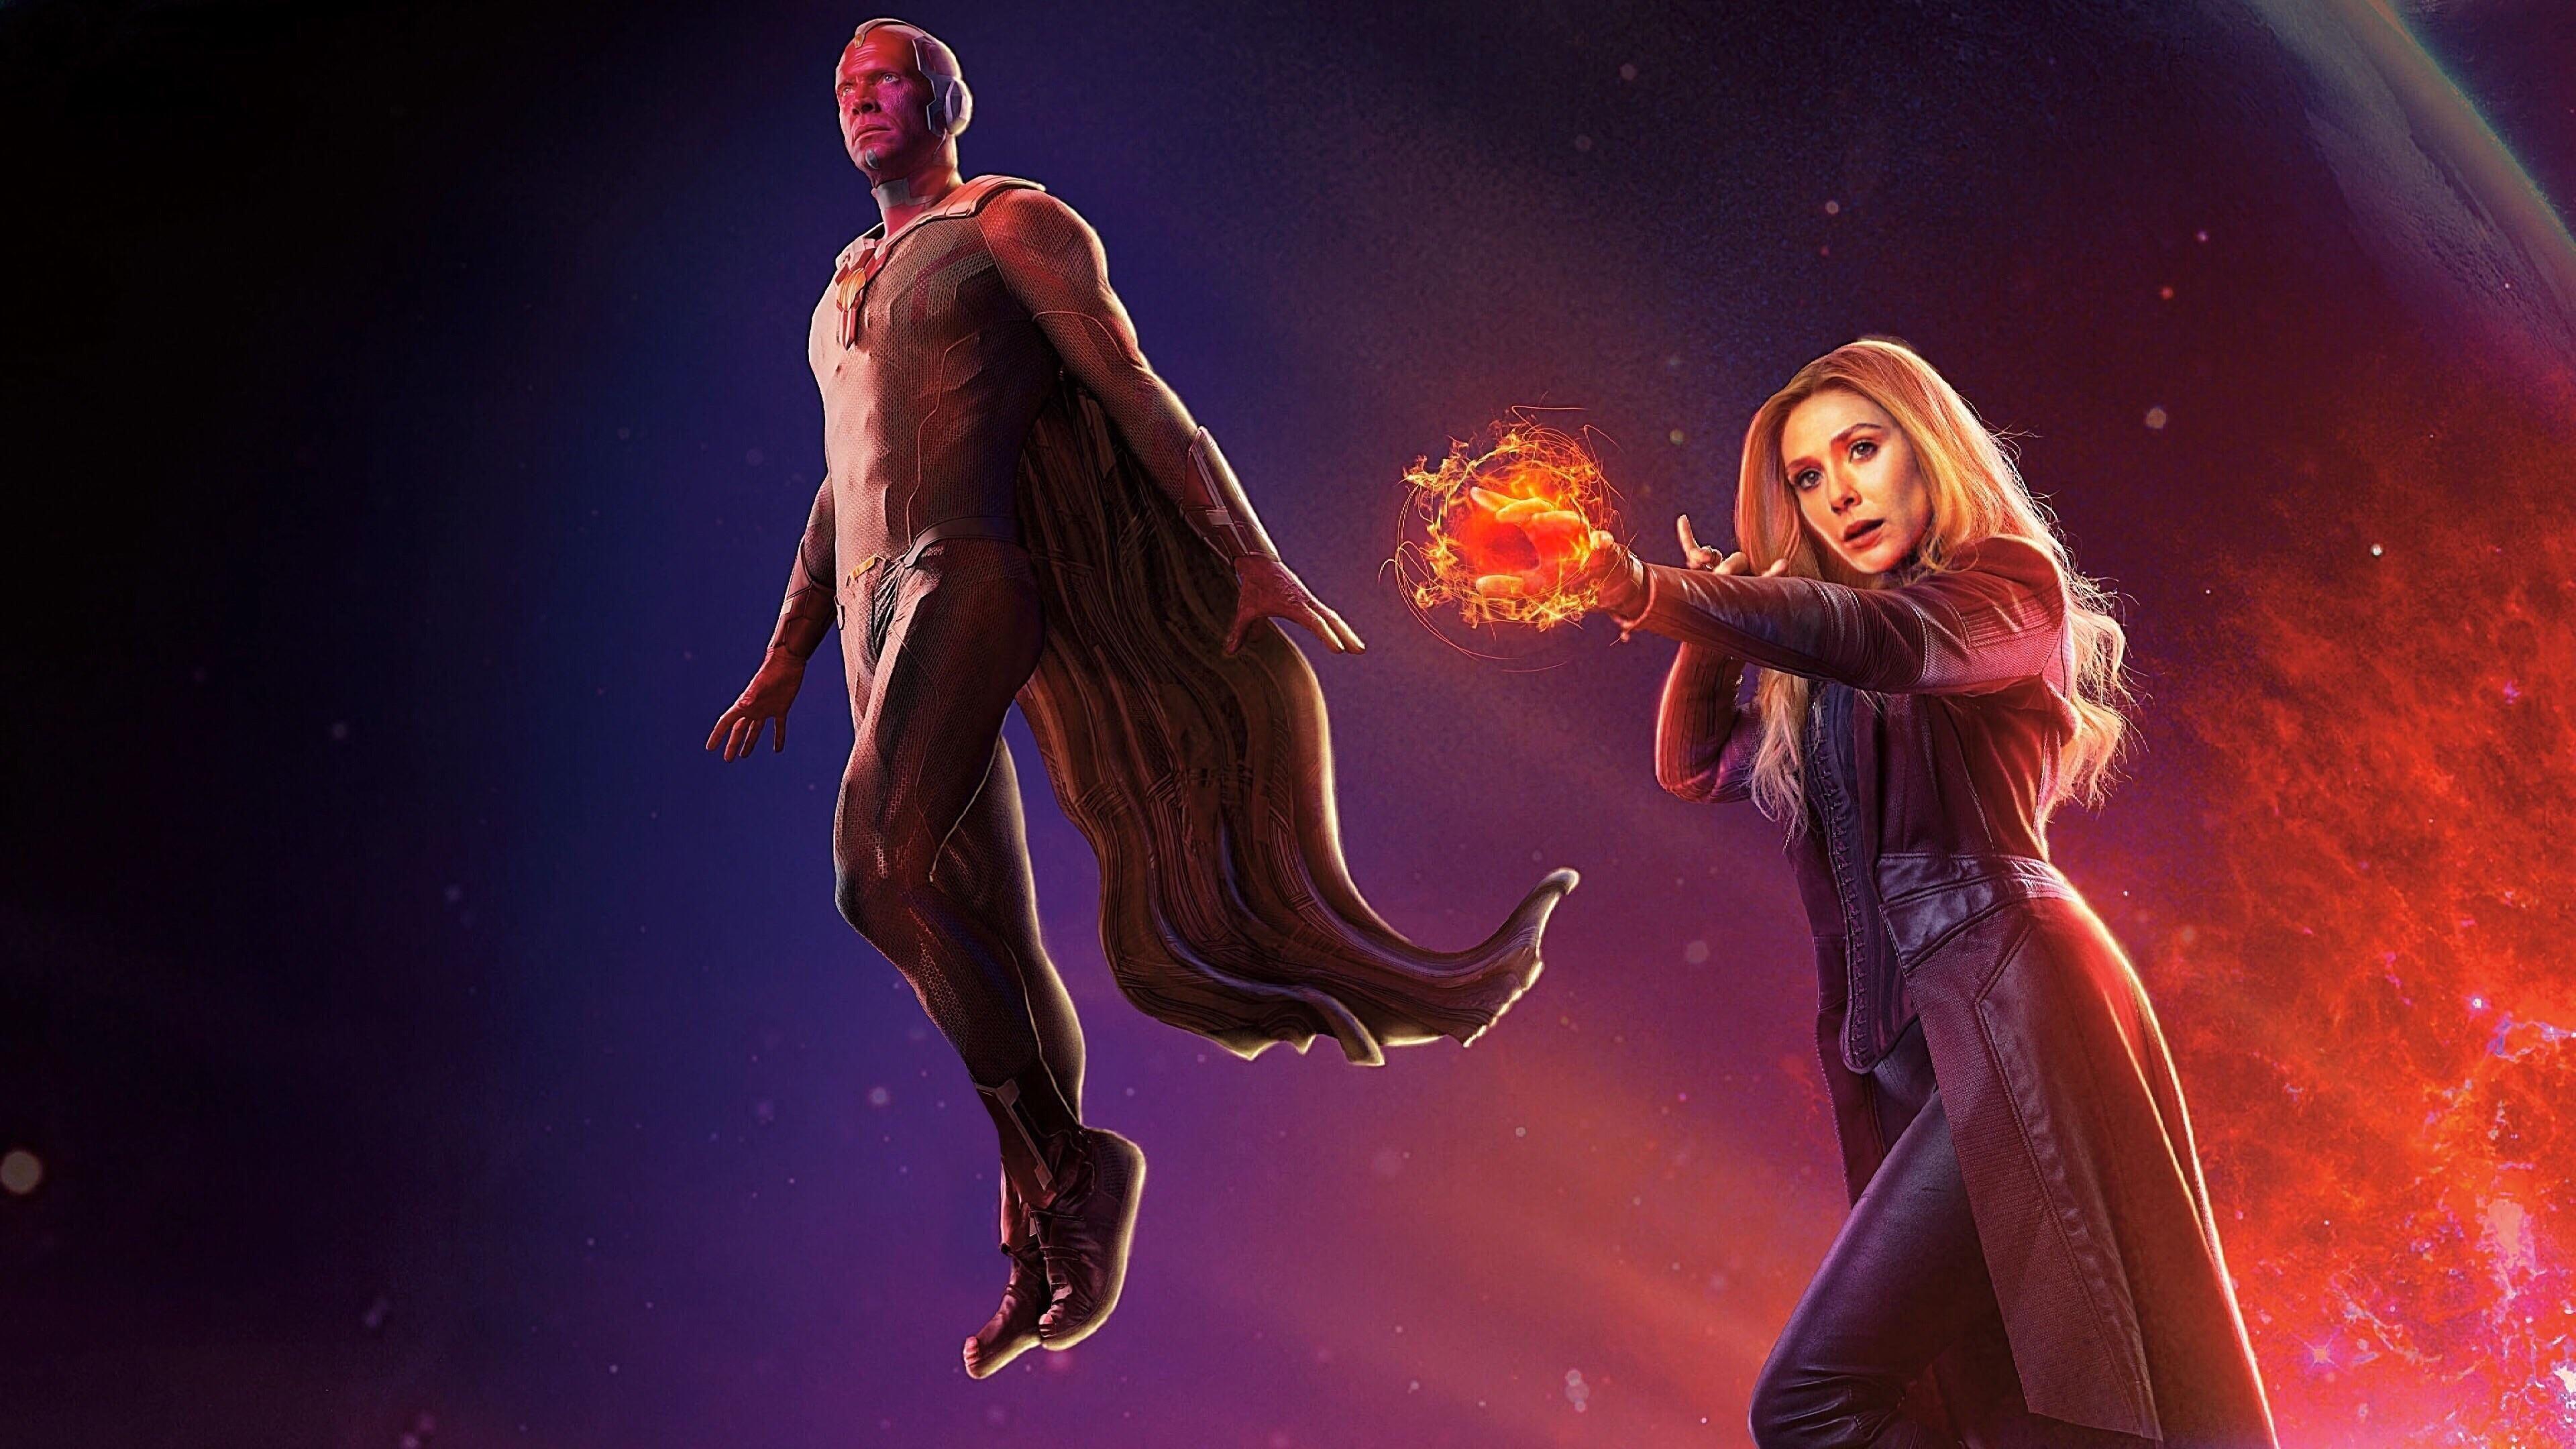 Avengers Infinity War Scarlet Witch and Vision 4k wallpaper!. Witch wallpaper, Scarlet witch, Marvel 4k